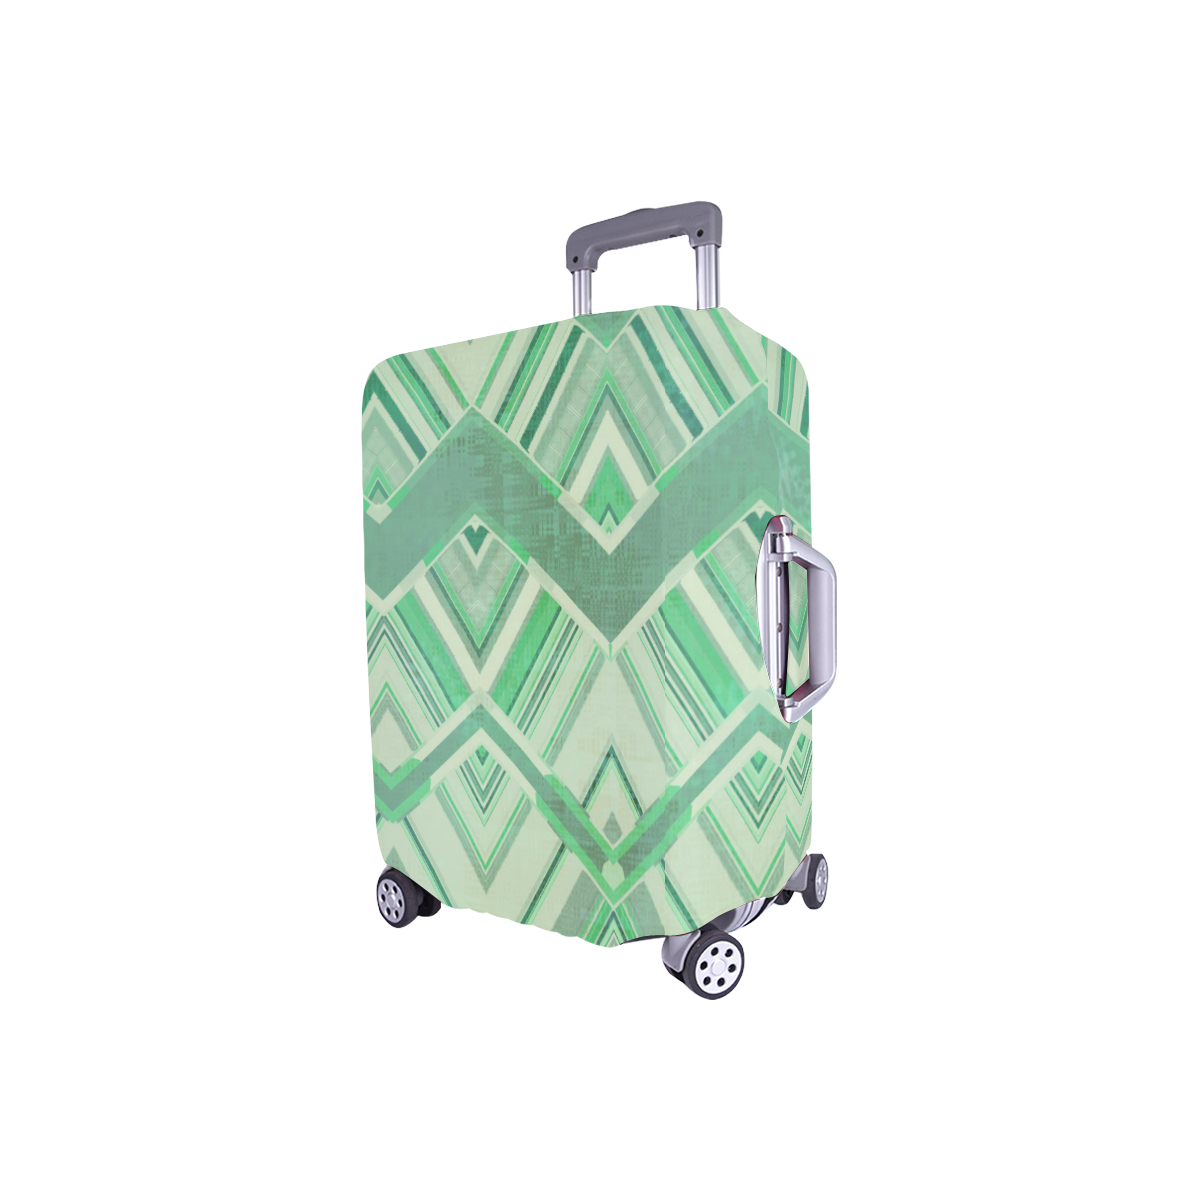 Mint Chevrons Luggage Cover/Small 18"-21"